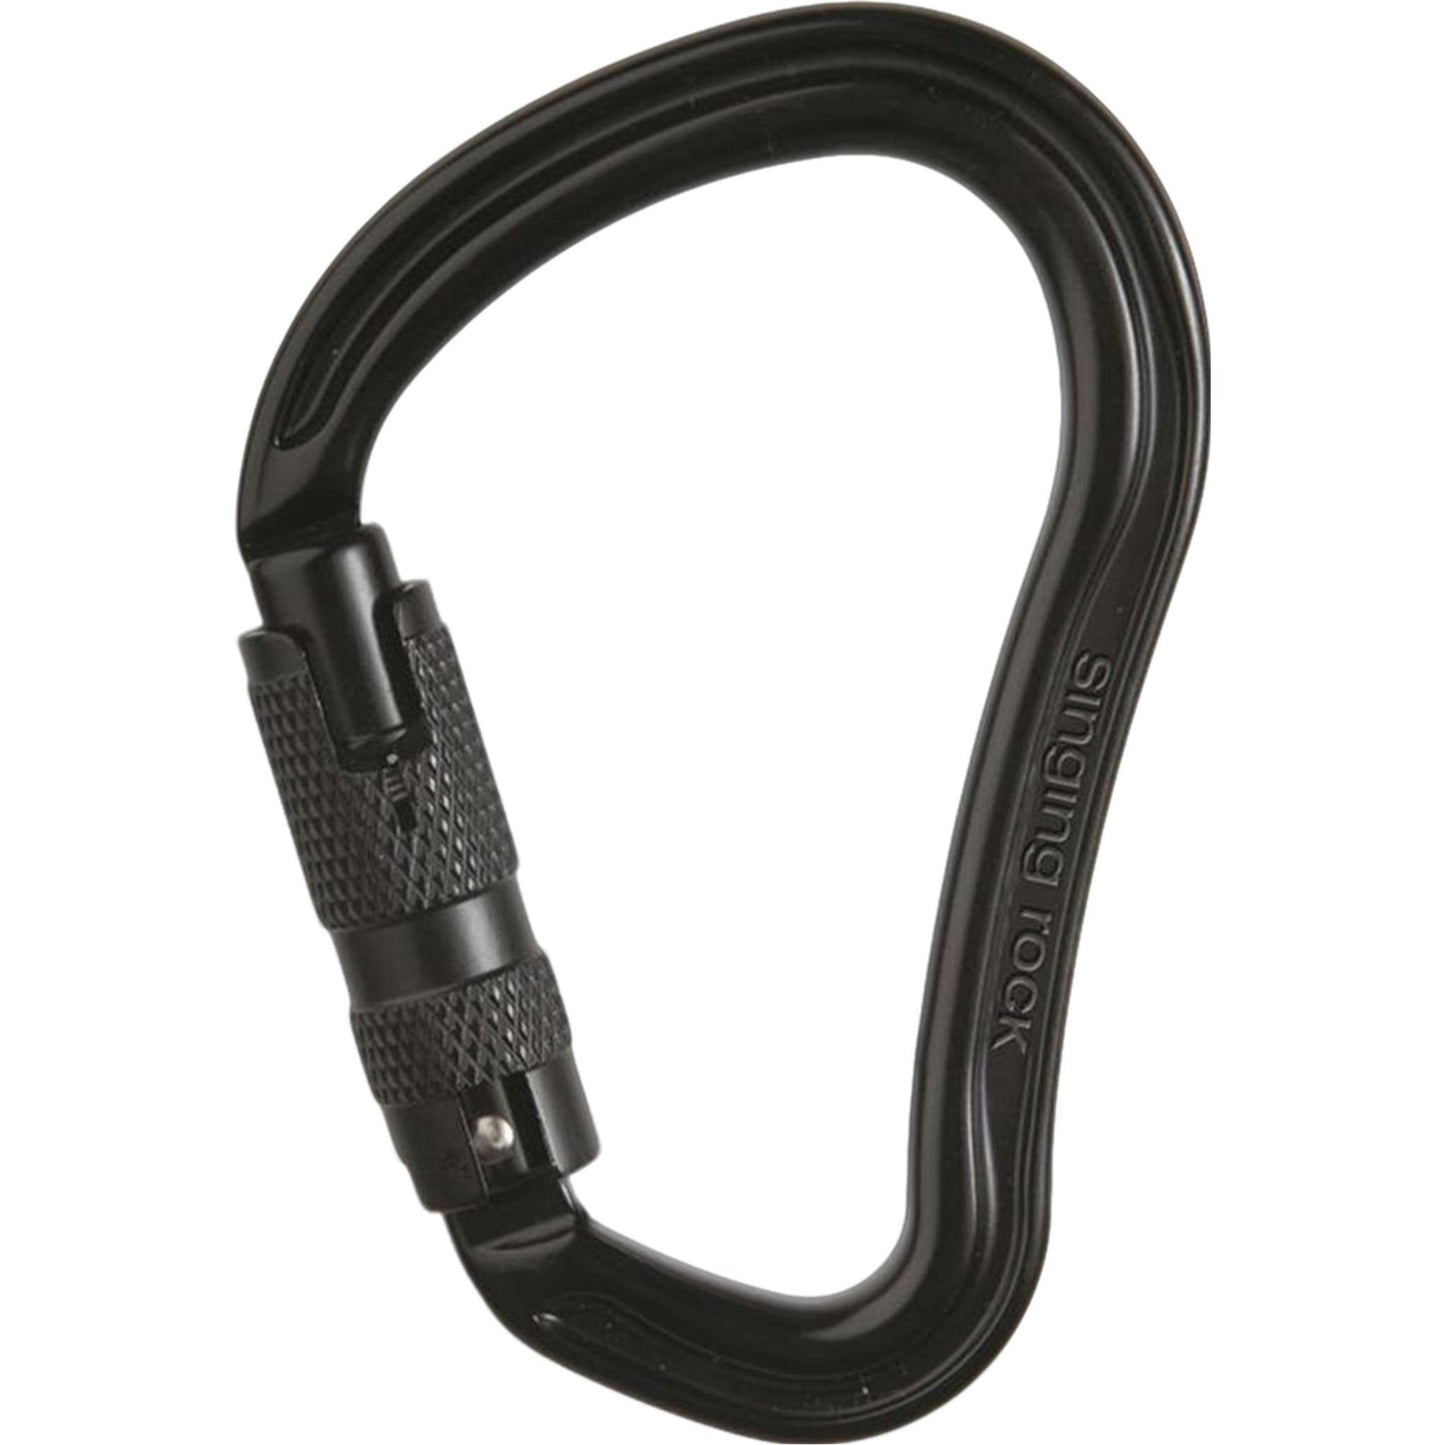 Hector Triple Lock HMS Carabiner - High Strength, Large Versatile Pear-Shaped for Belaying & Anchoring